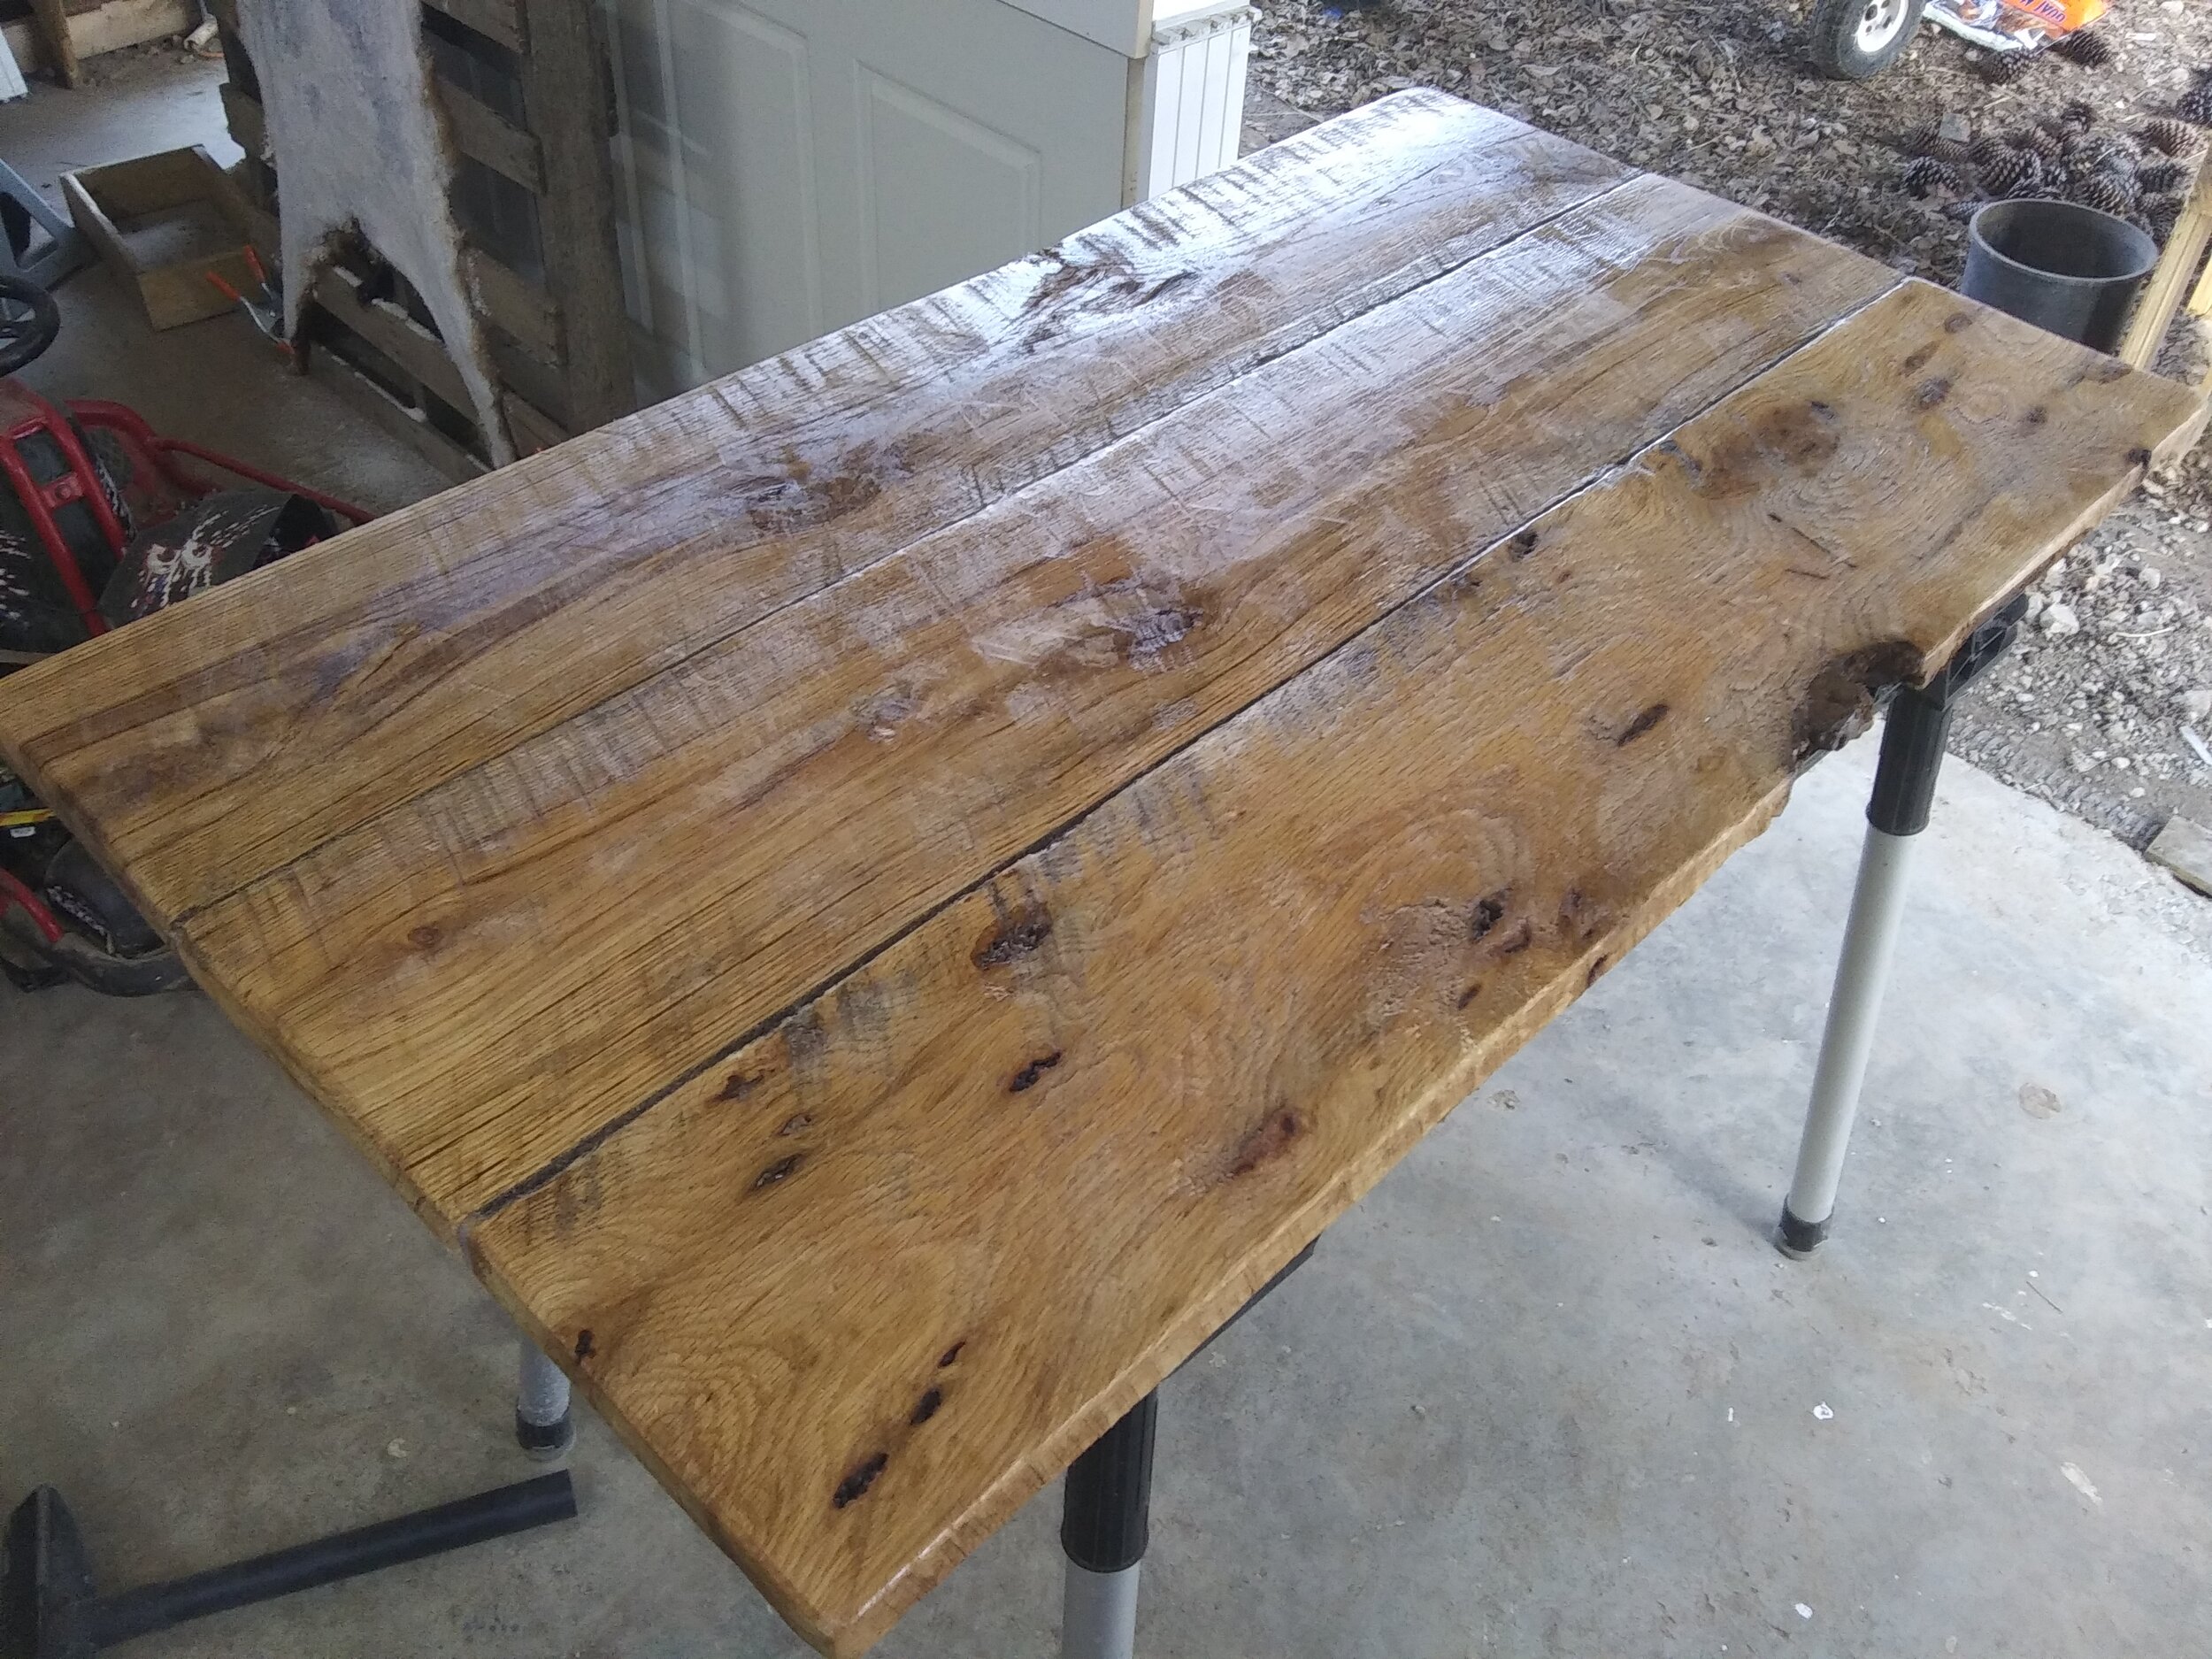  Barn wood island top for kitchen project. 